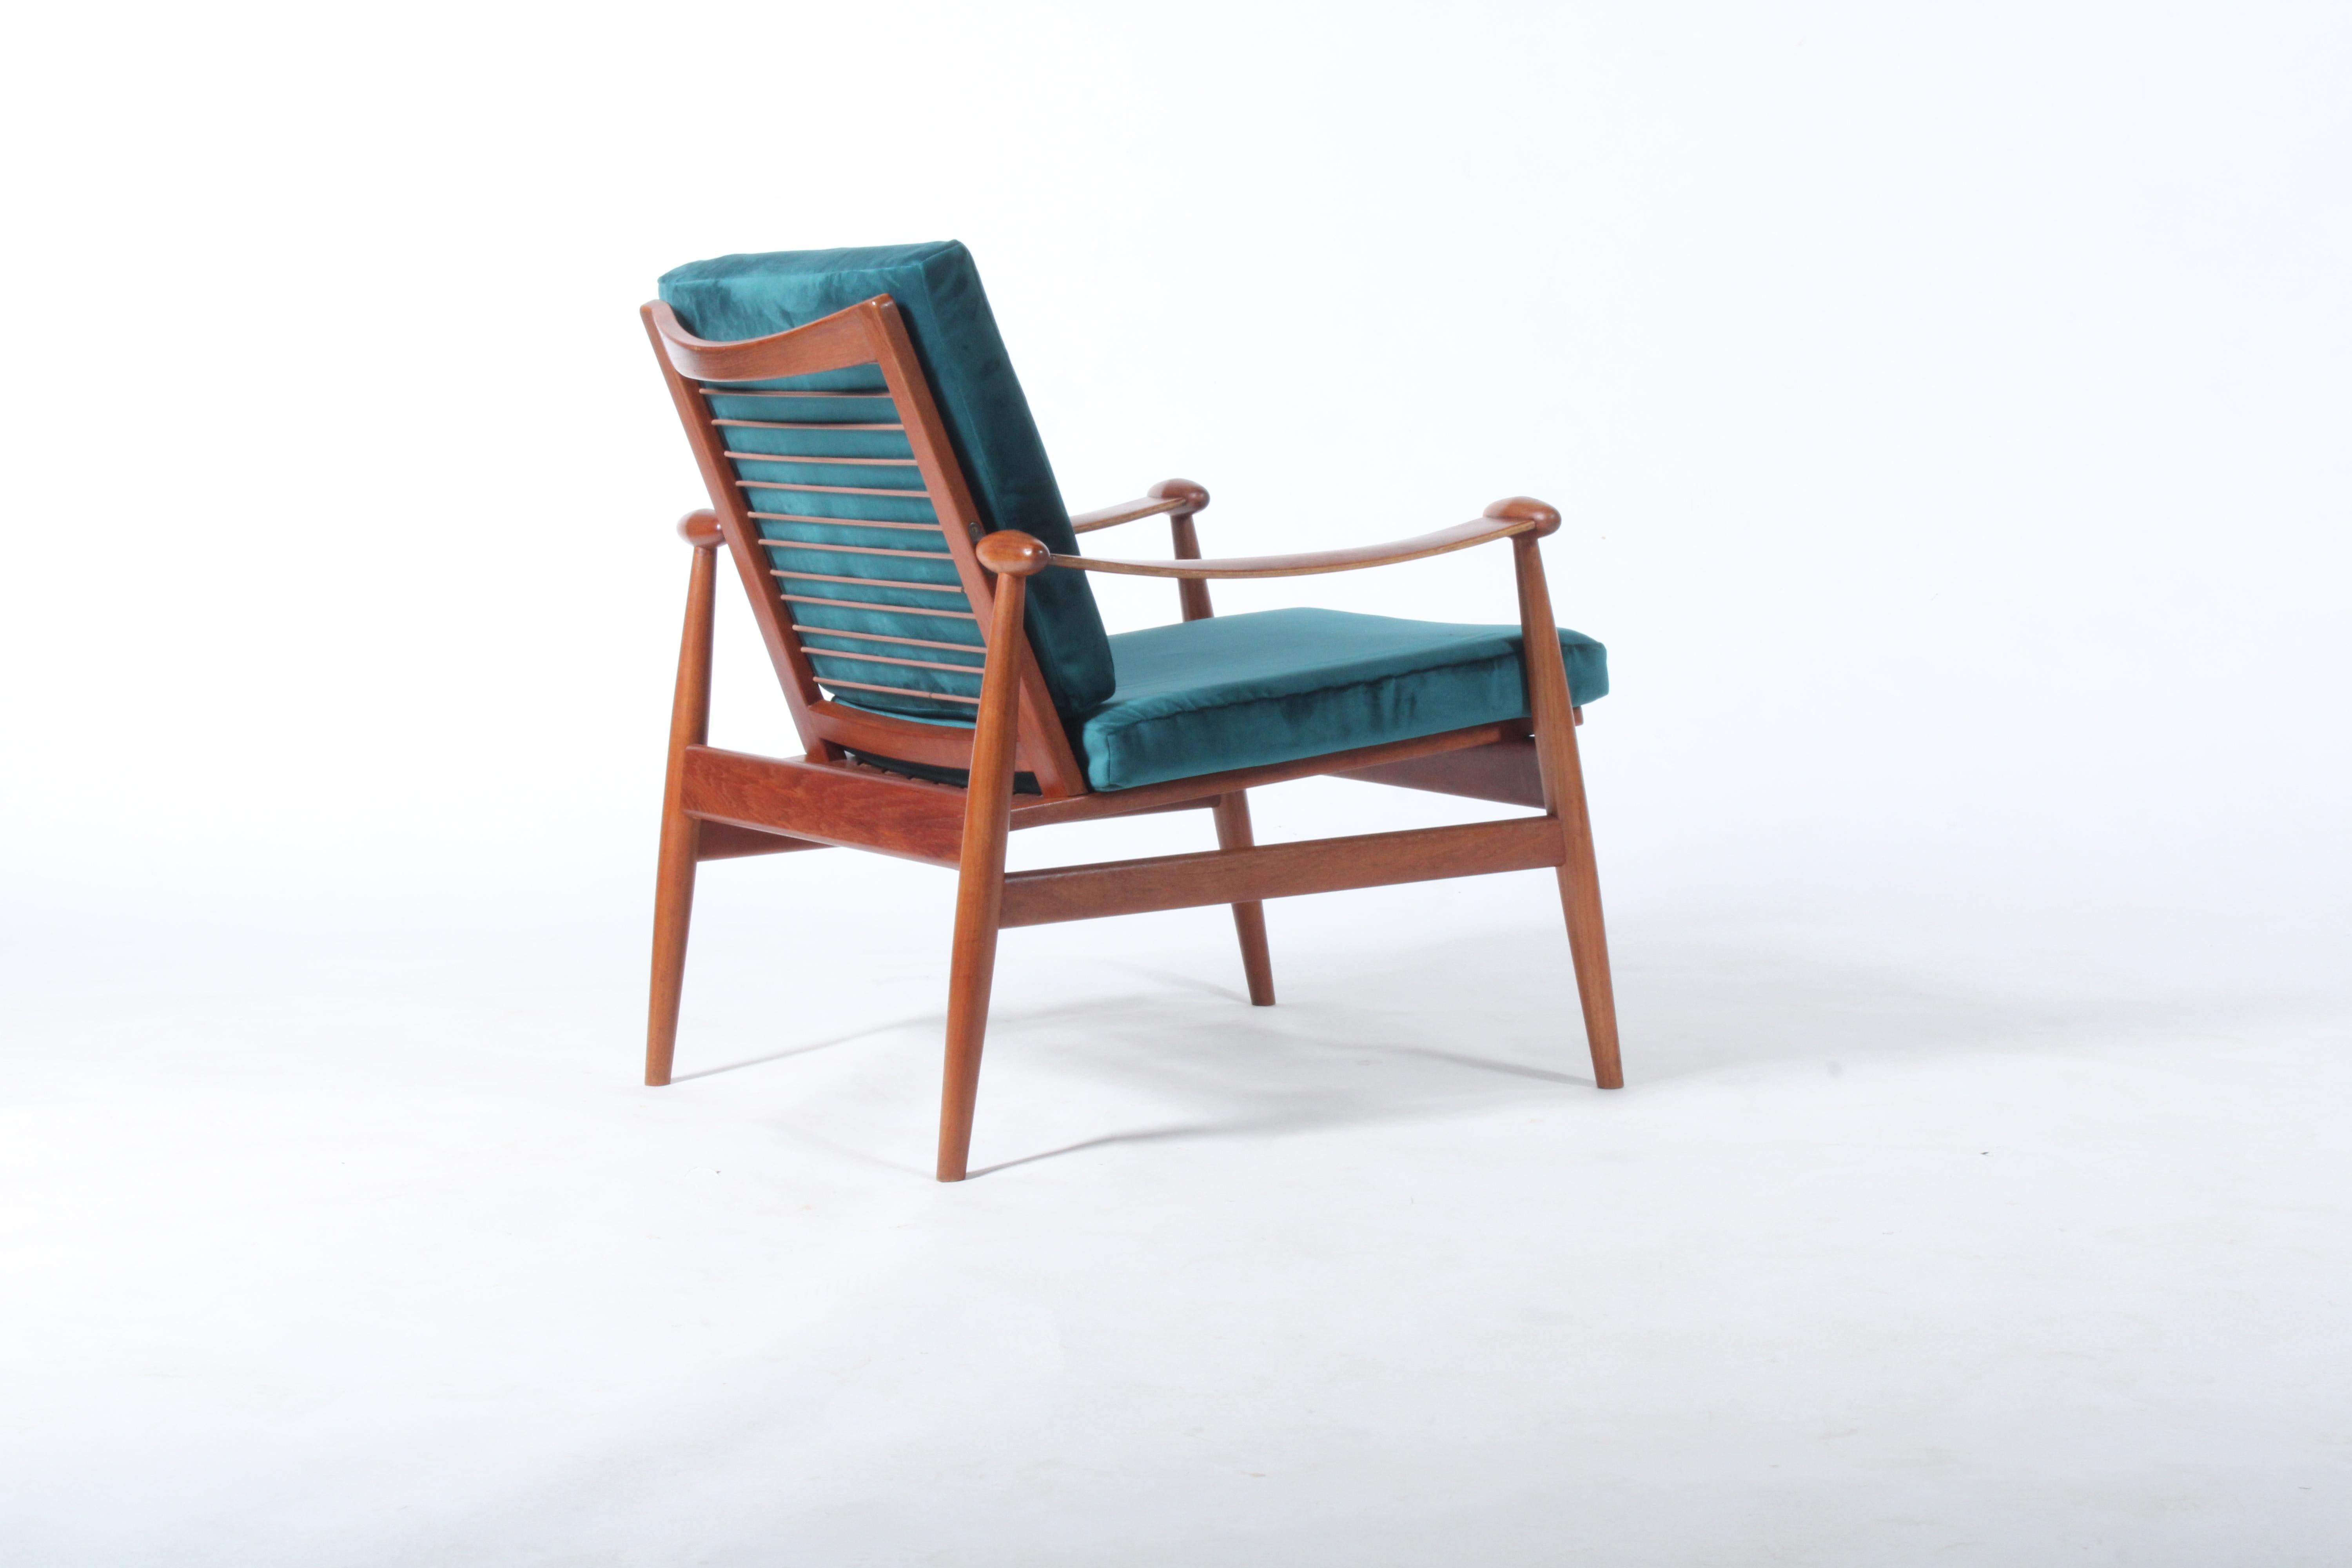 Mid-Century Modern Exquisite Mid Century Danish Spade Chair By Finn Juhl For France & Son In Teak For Sale